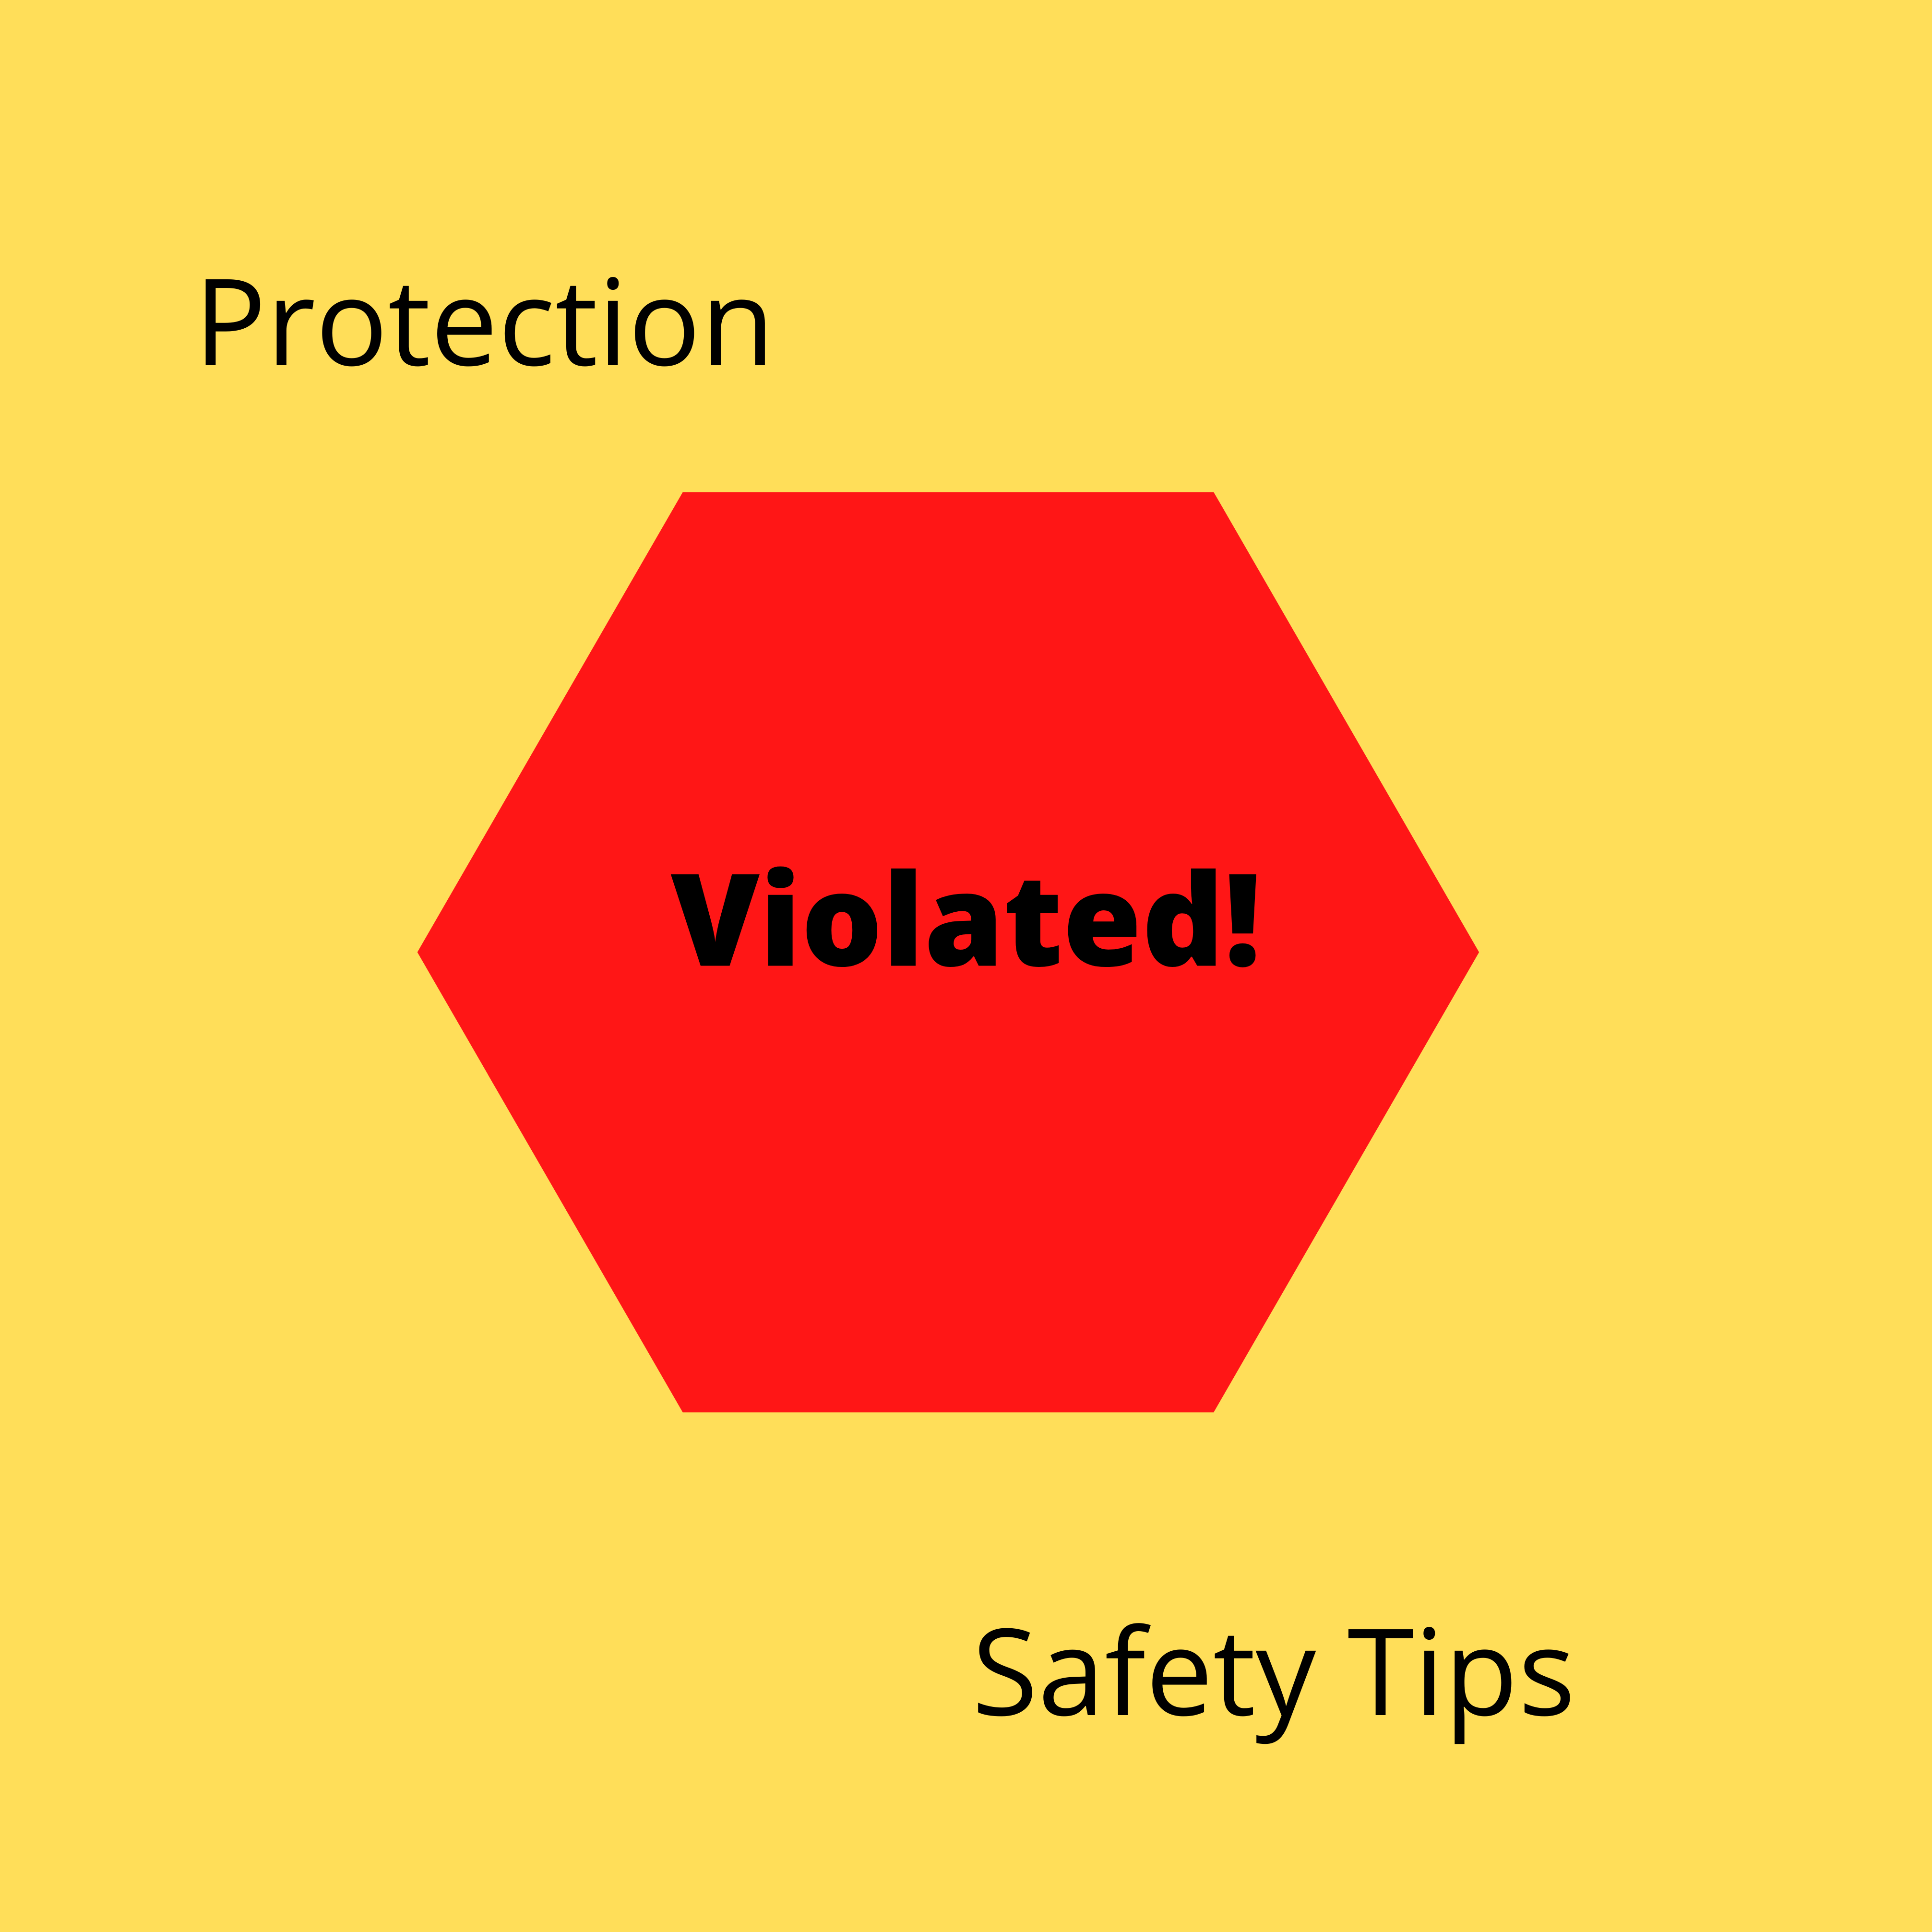 Protect yourself – Stealing Violates